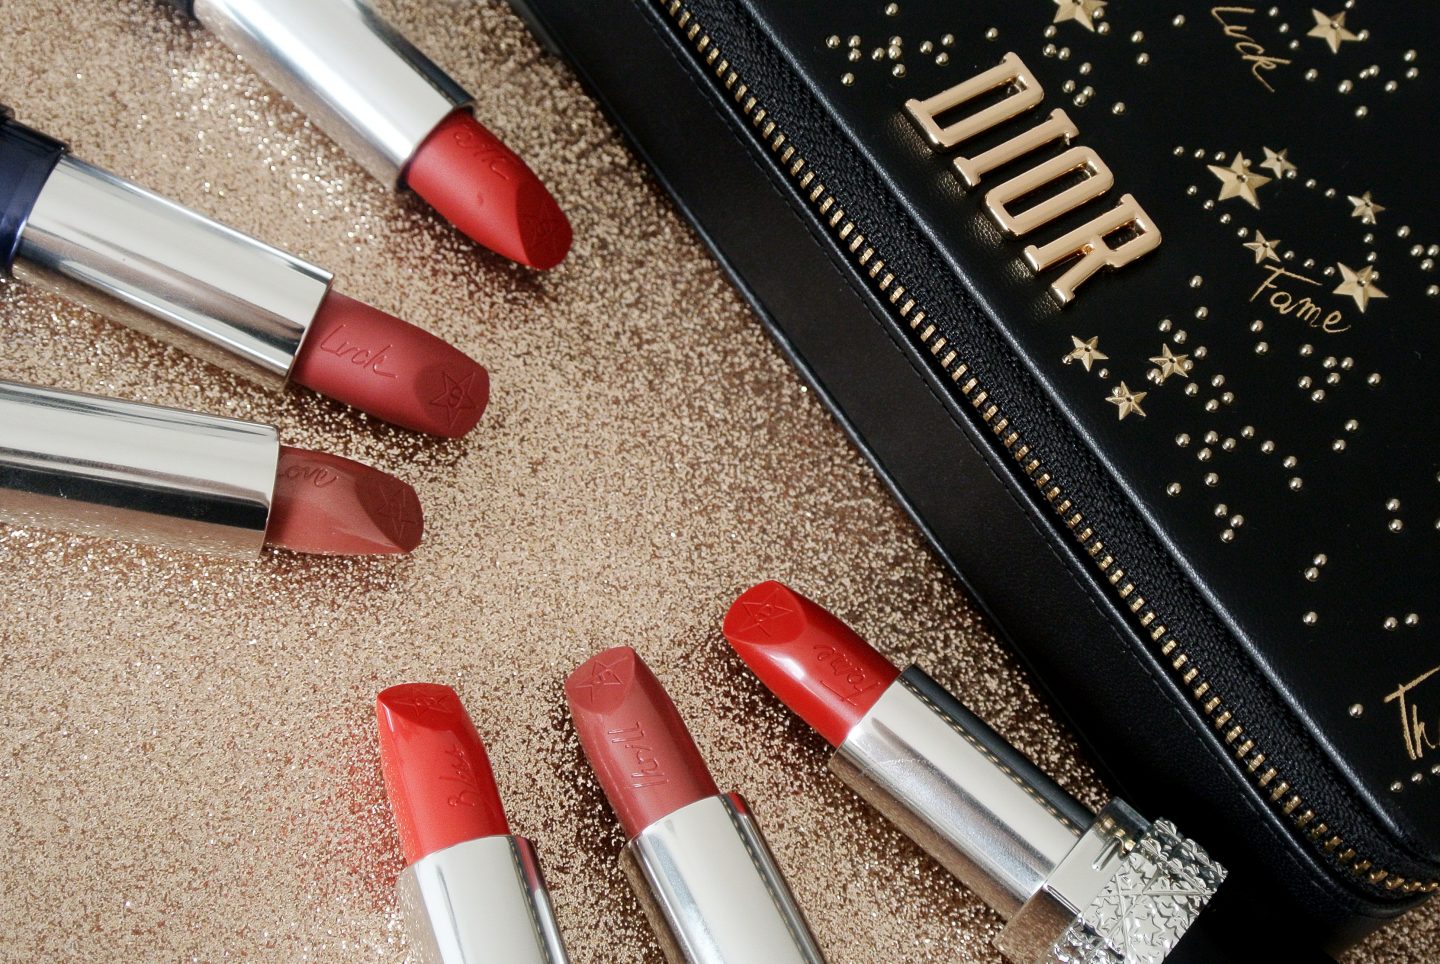 dior holiday couture collection midnight wish rouge dior set